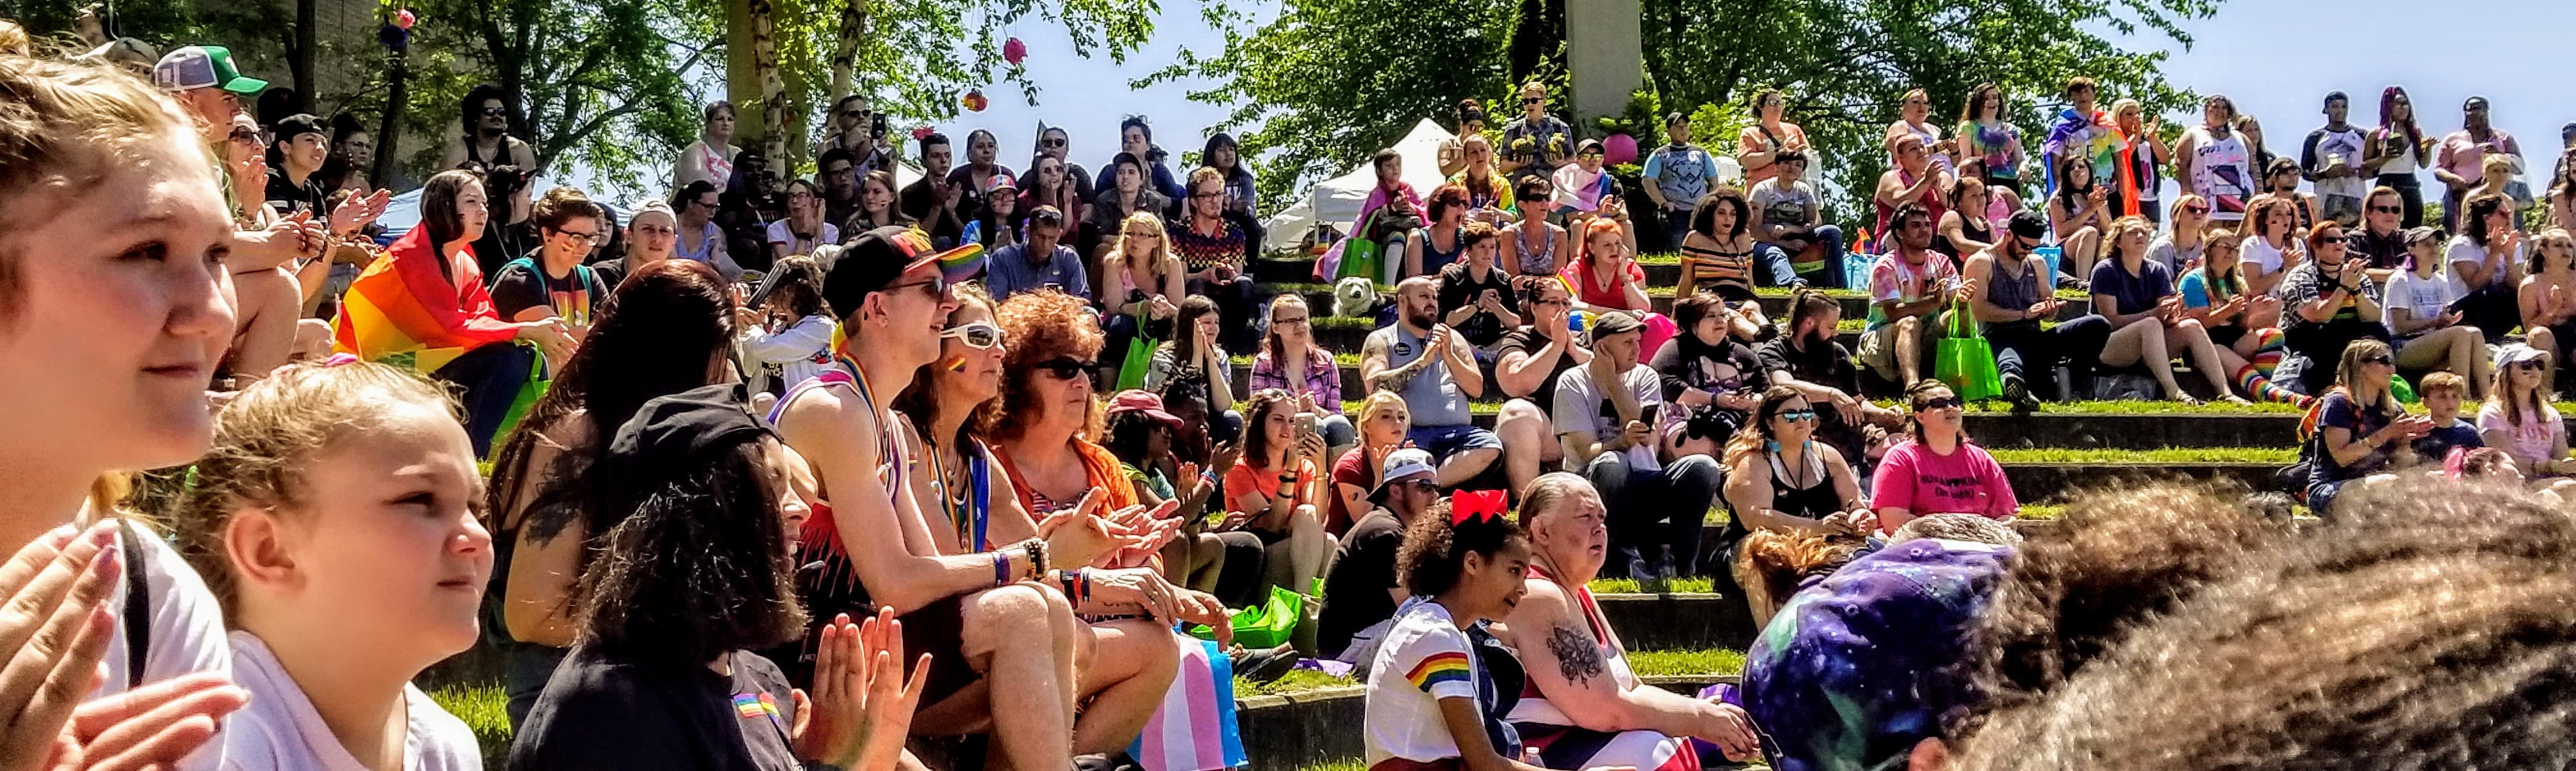 Thousands gather at Flint’s Ninth Annual Pride Festival East Village